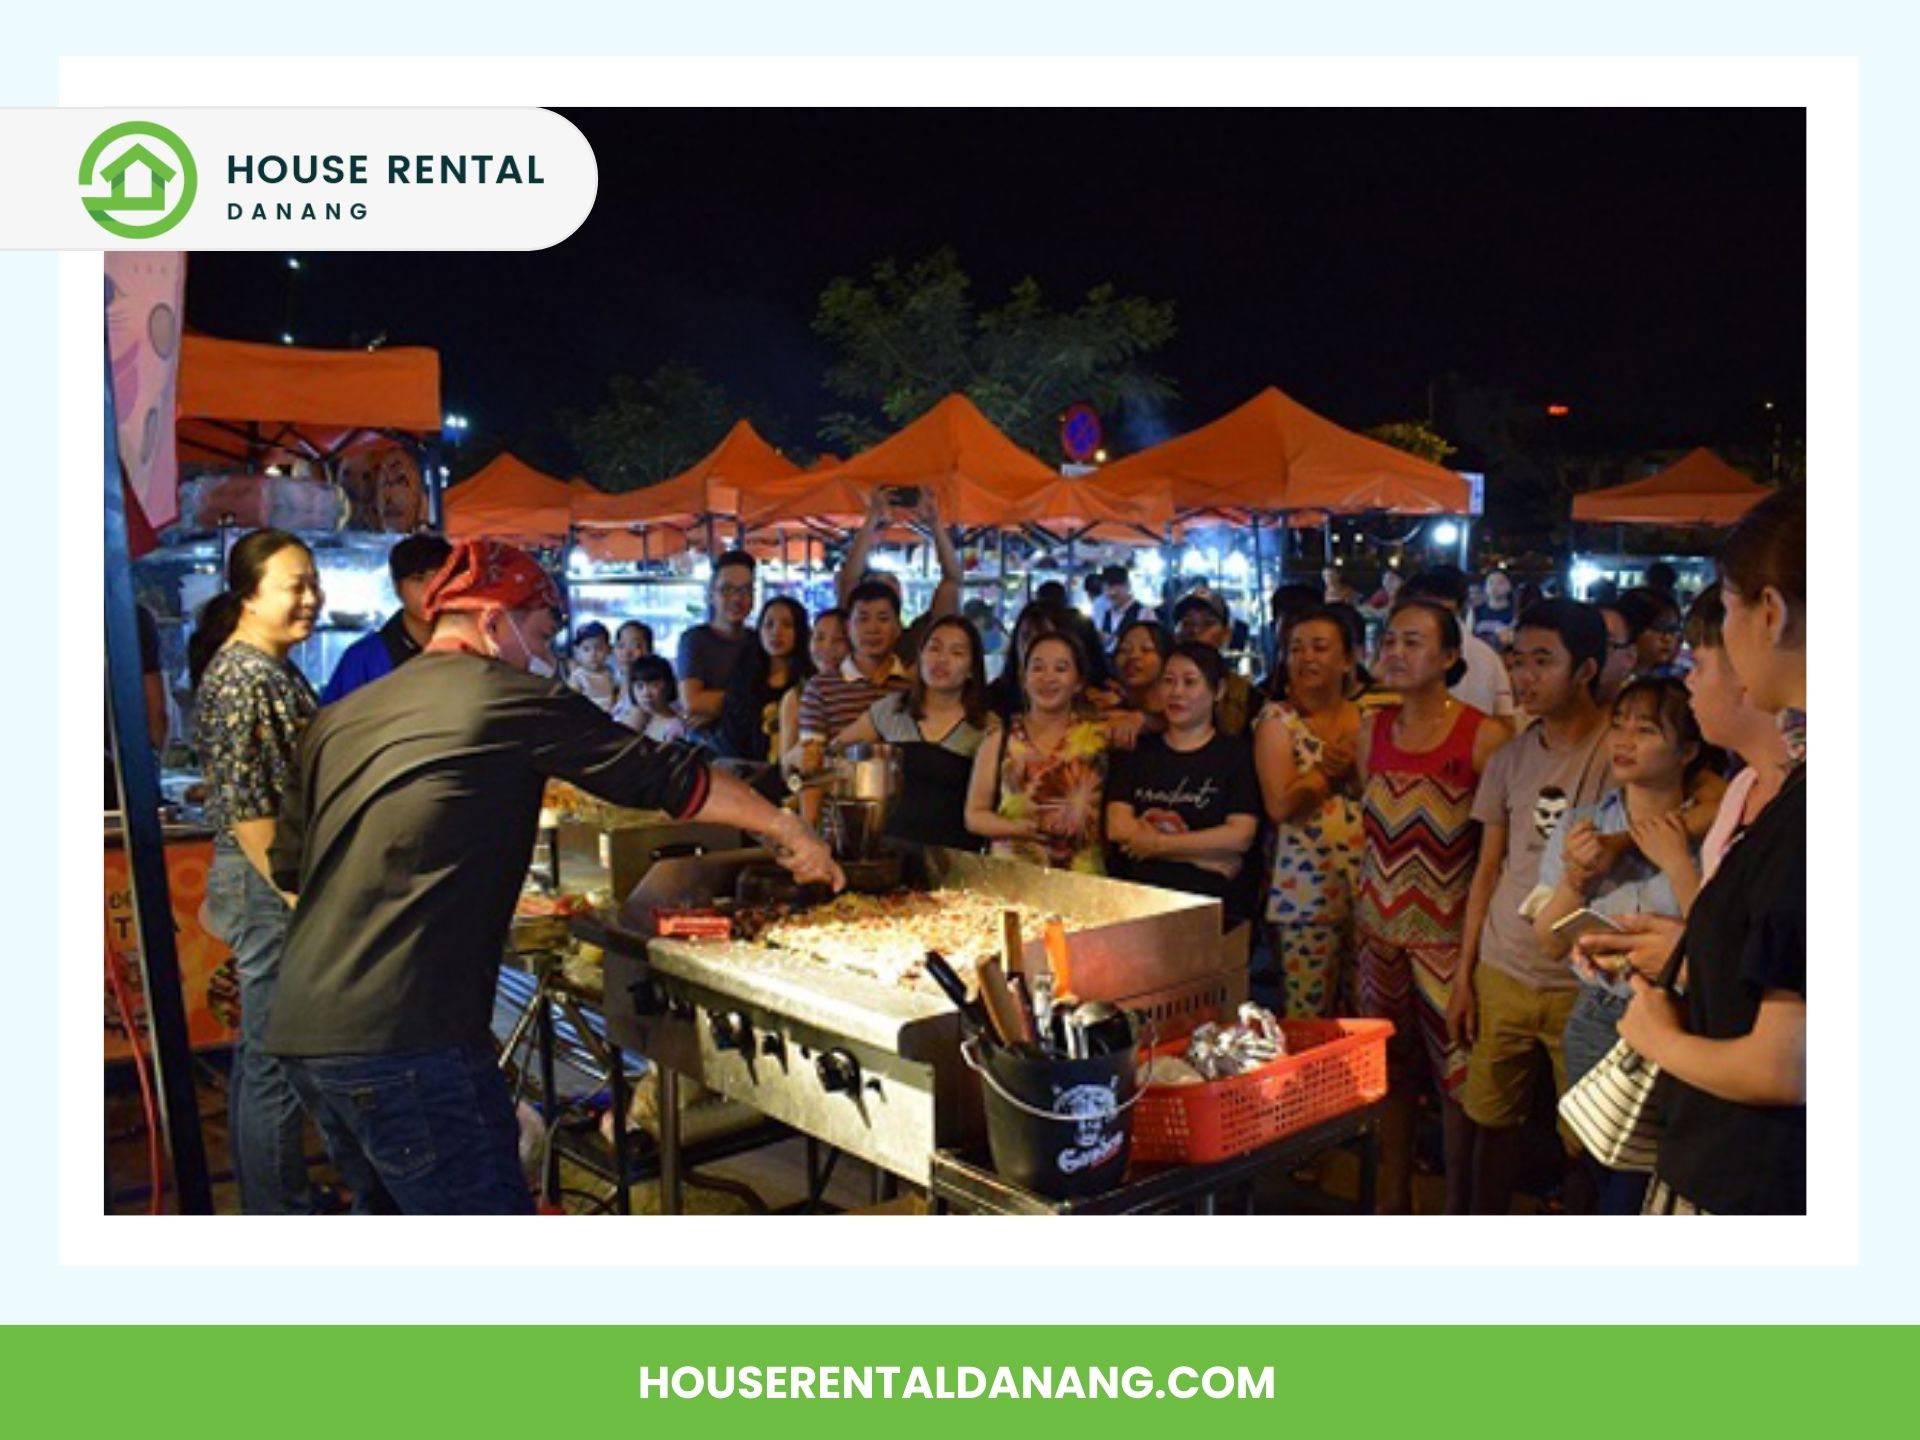 A chef cooking at an outdoor market stall as a crowd of people watches. Orange canopy tents are visible in the background, reminiscent of the vibrant Night Markets in Danang. House Rental Danang website details are displayed in the image frame.